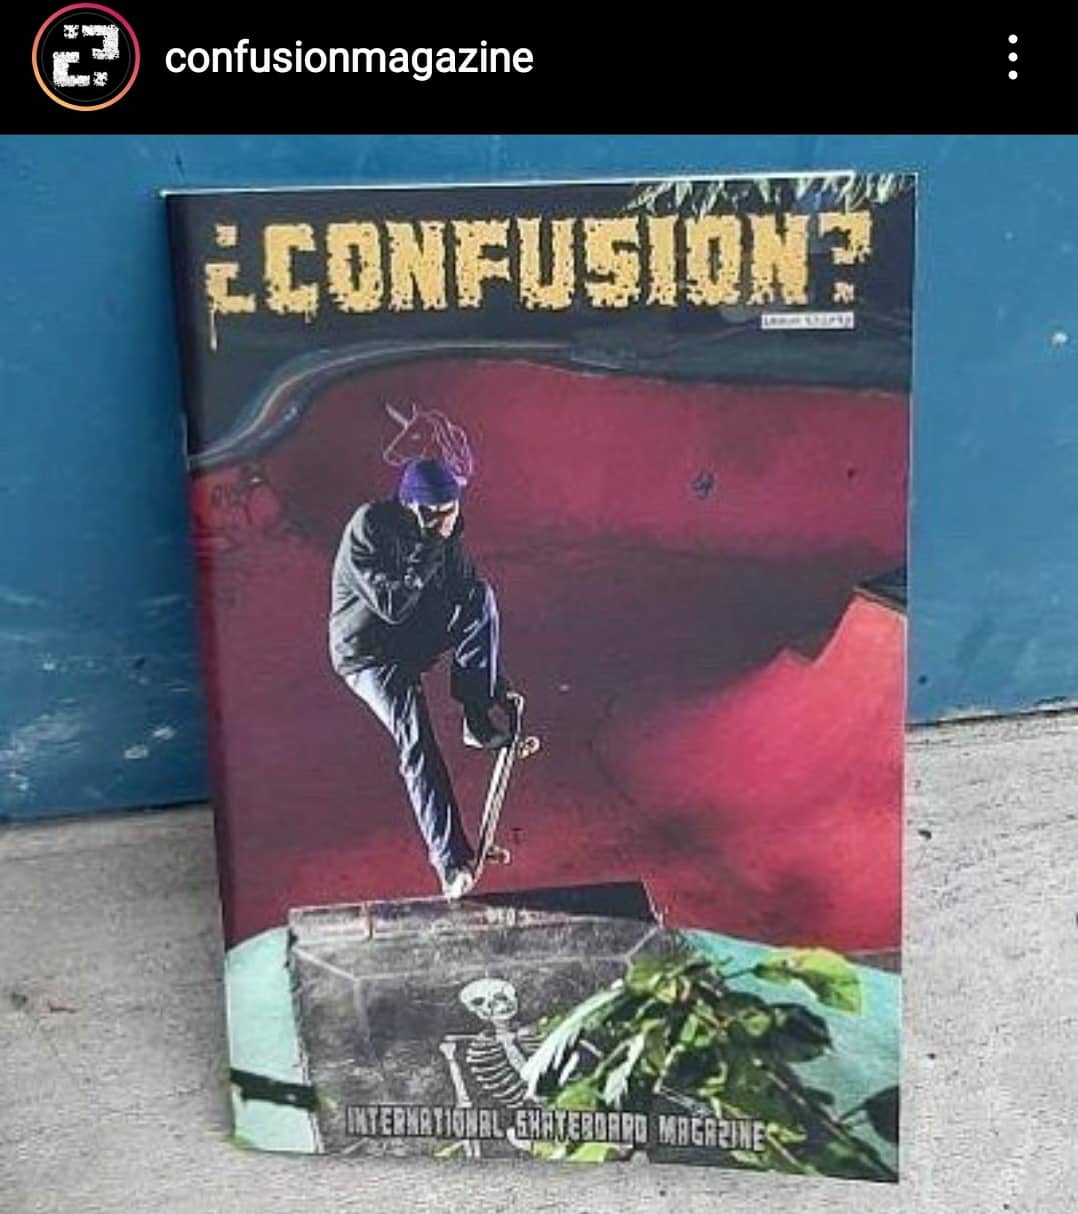 Check out Old School on the Confusion Magazine #30 issue🔥